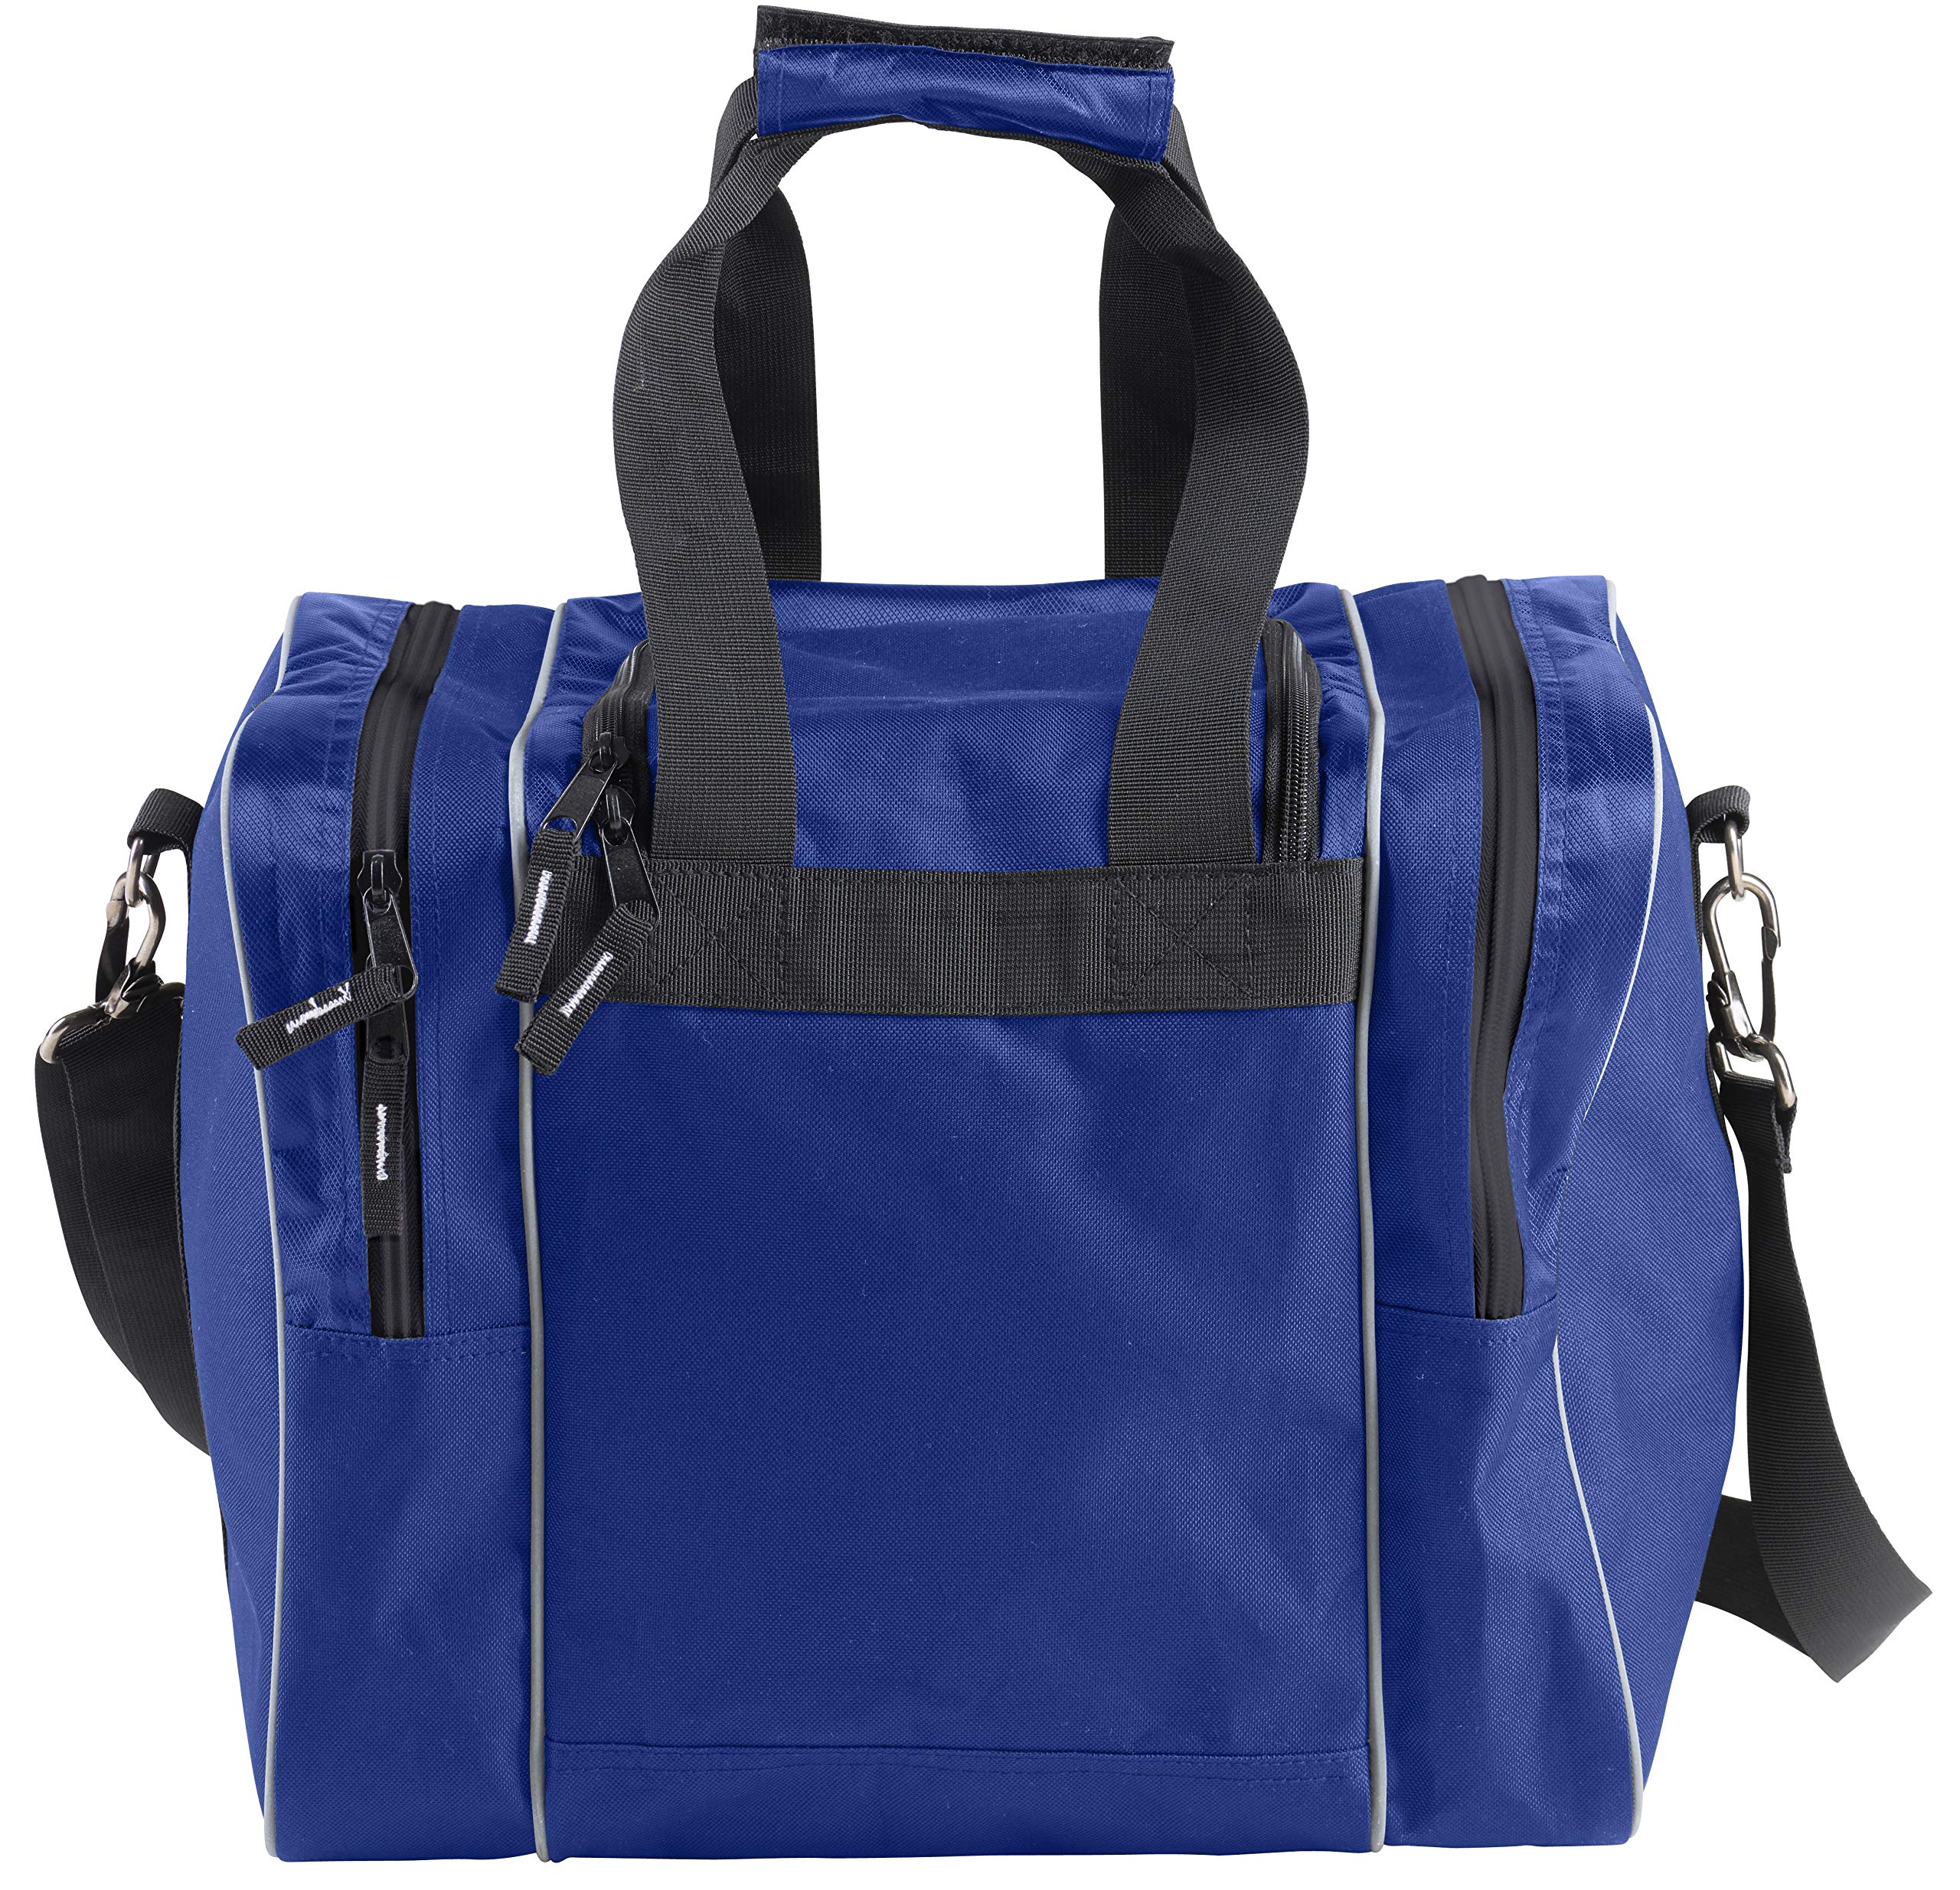 Athletico Bowling Bag for Single Ball - Single Ball Tote Bag With Padded Ball Holder - Fits a Single Pair of Bowling Shoes Up to Mens Size 14 (Blue)  - Acceptable